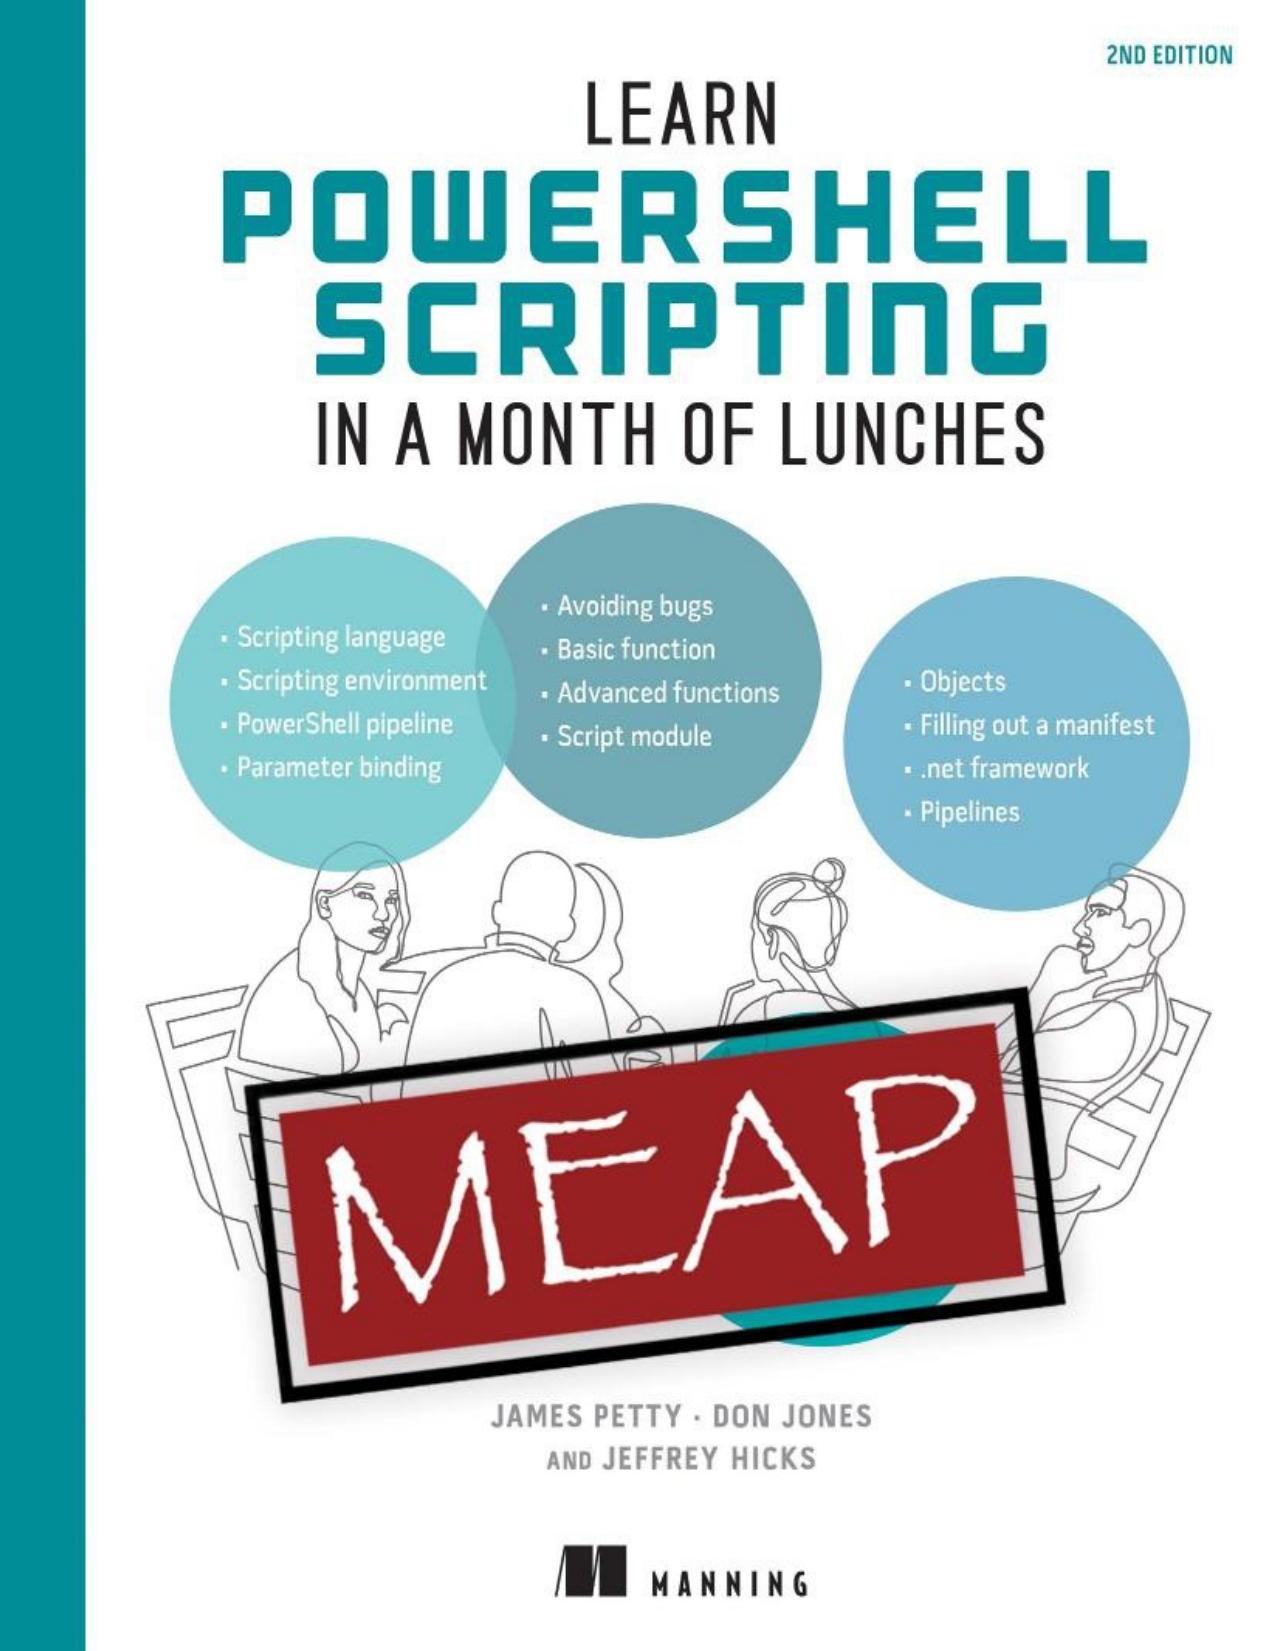 Learn PowerShell Scripting in a Month of Lunches, Second Edition MEAP V06 by James Petty